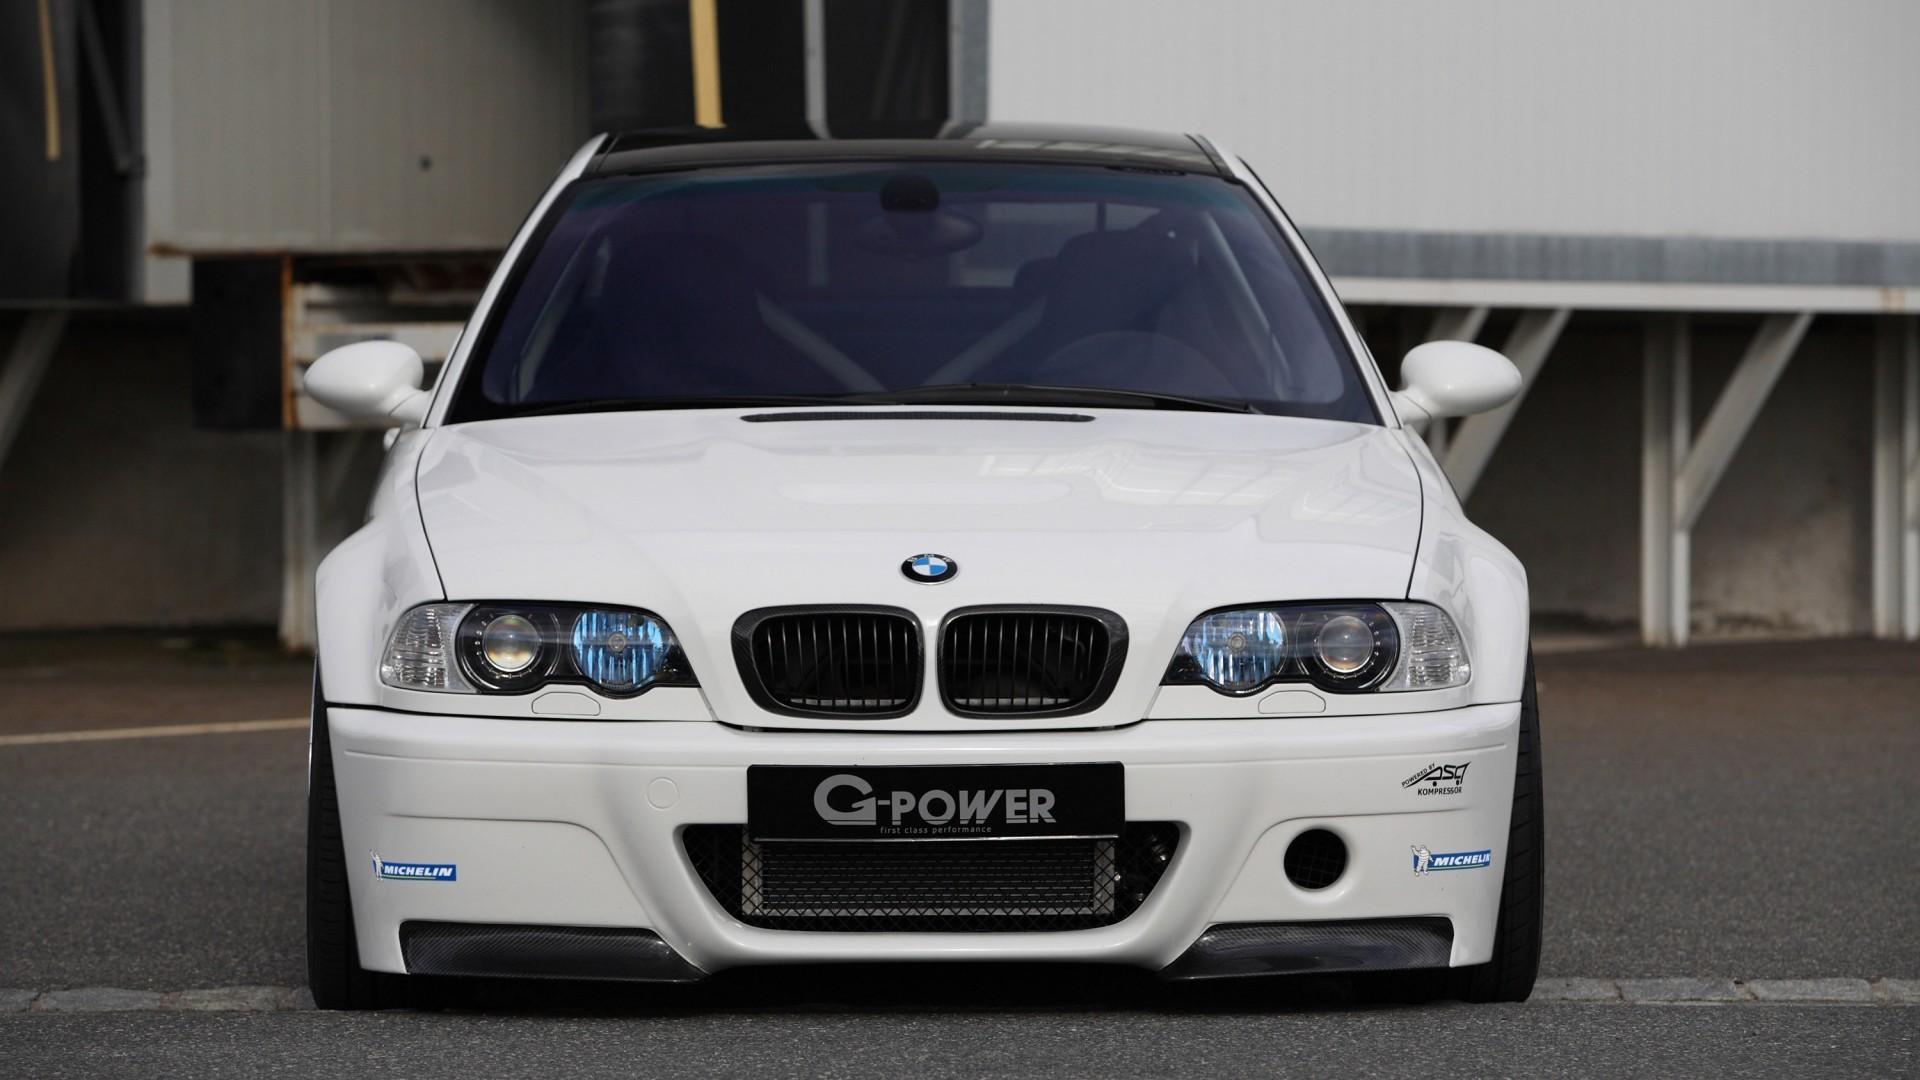 Bmw M3 E46 G Power Cars Tuned Tuning Wallpaper